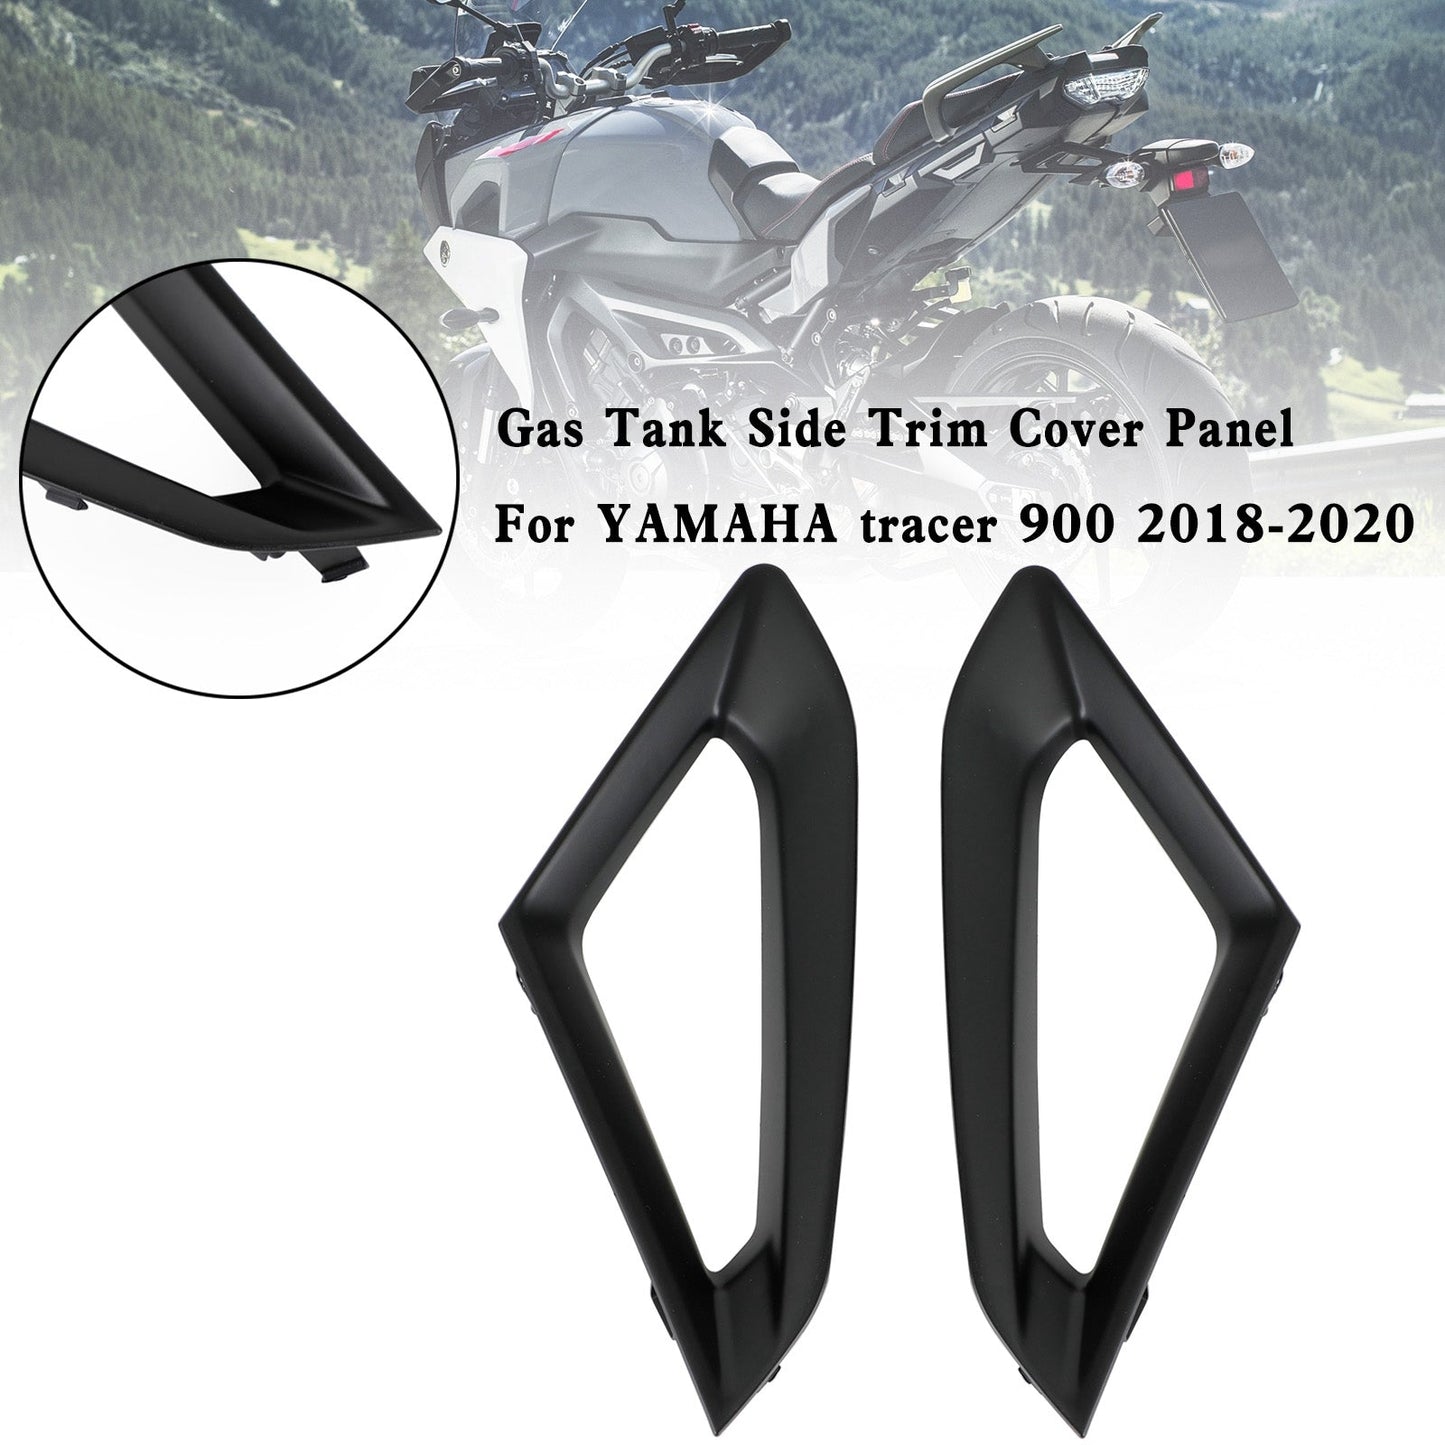 Gas Tank Side Trim Cover Panel For YAMAHA tracer 900 GT 2018-2020 Black